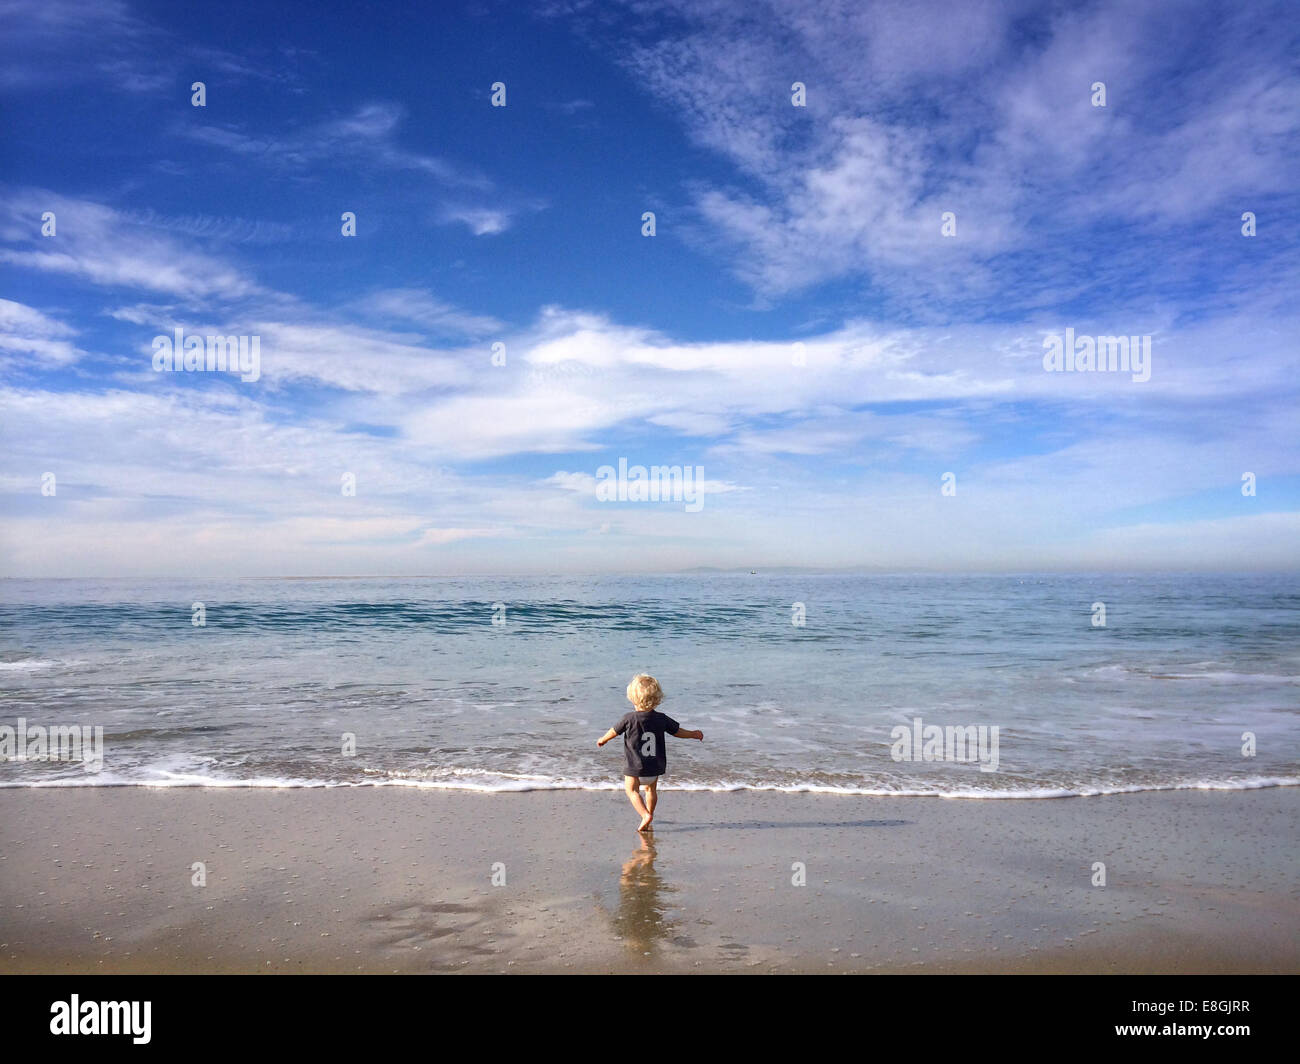 Boy running into the ocean, California, United States Stock Photo